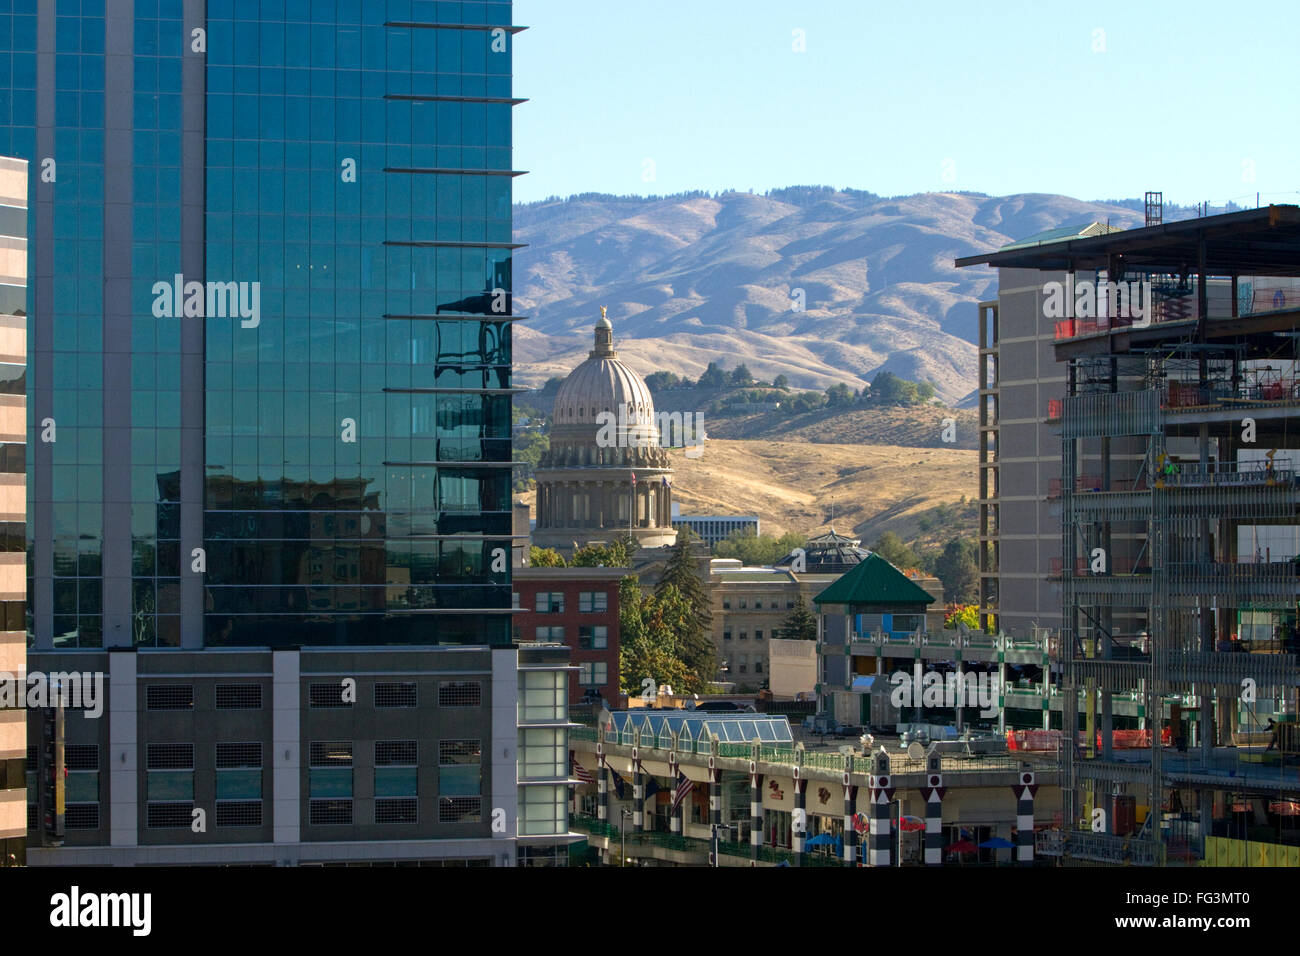 Idaho state capitol building in downtown Boise, Idaho, USA. Stock Photo